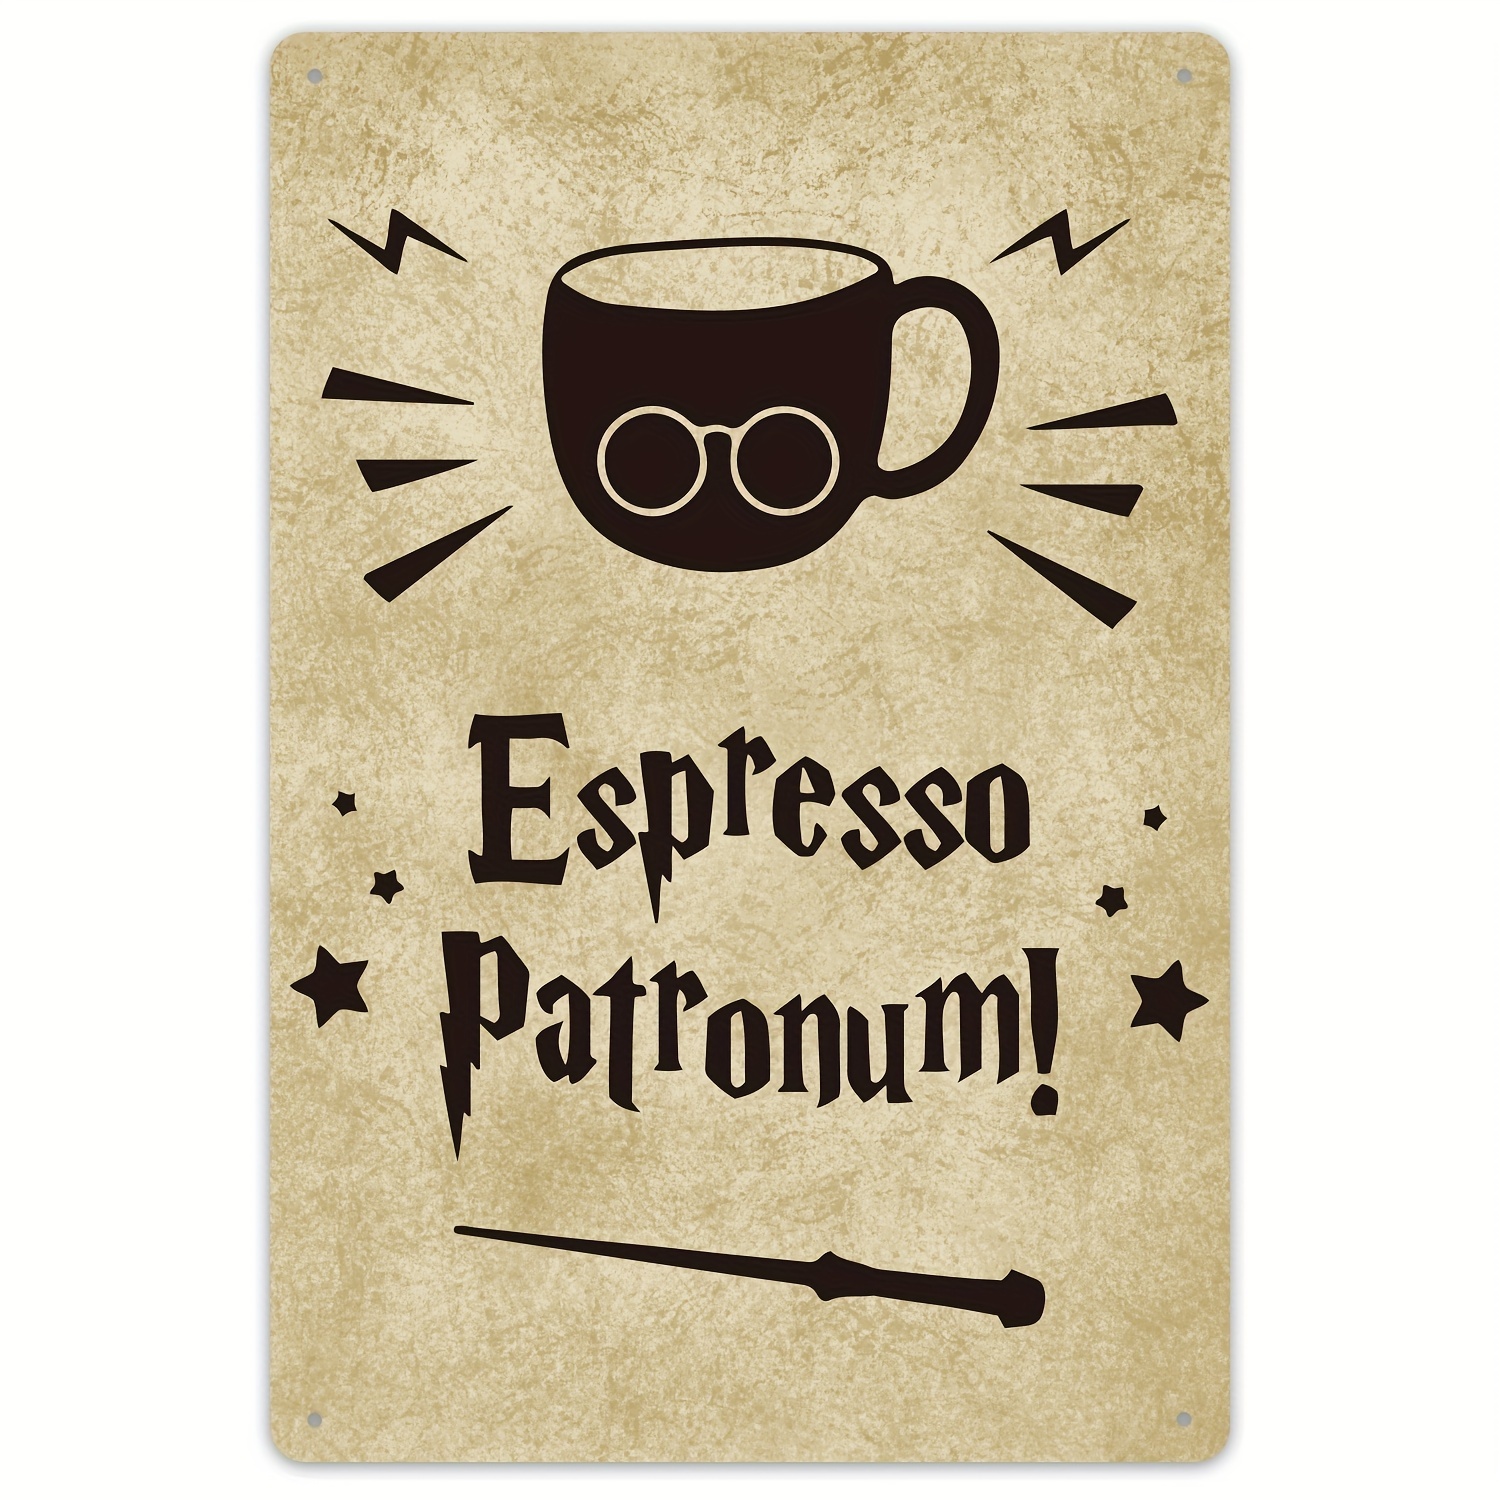 

1pc Vintage Metal Sign, Espresso Patronum Tin Sign Wall Art Decor, Wizard Metal Sign For Coffee Bar Bedroom(20*30cm)